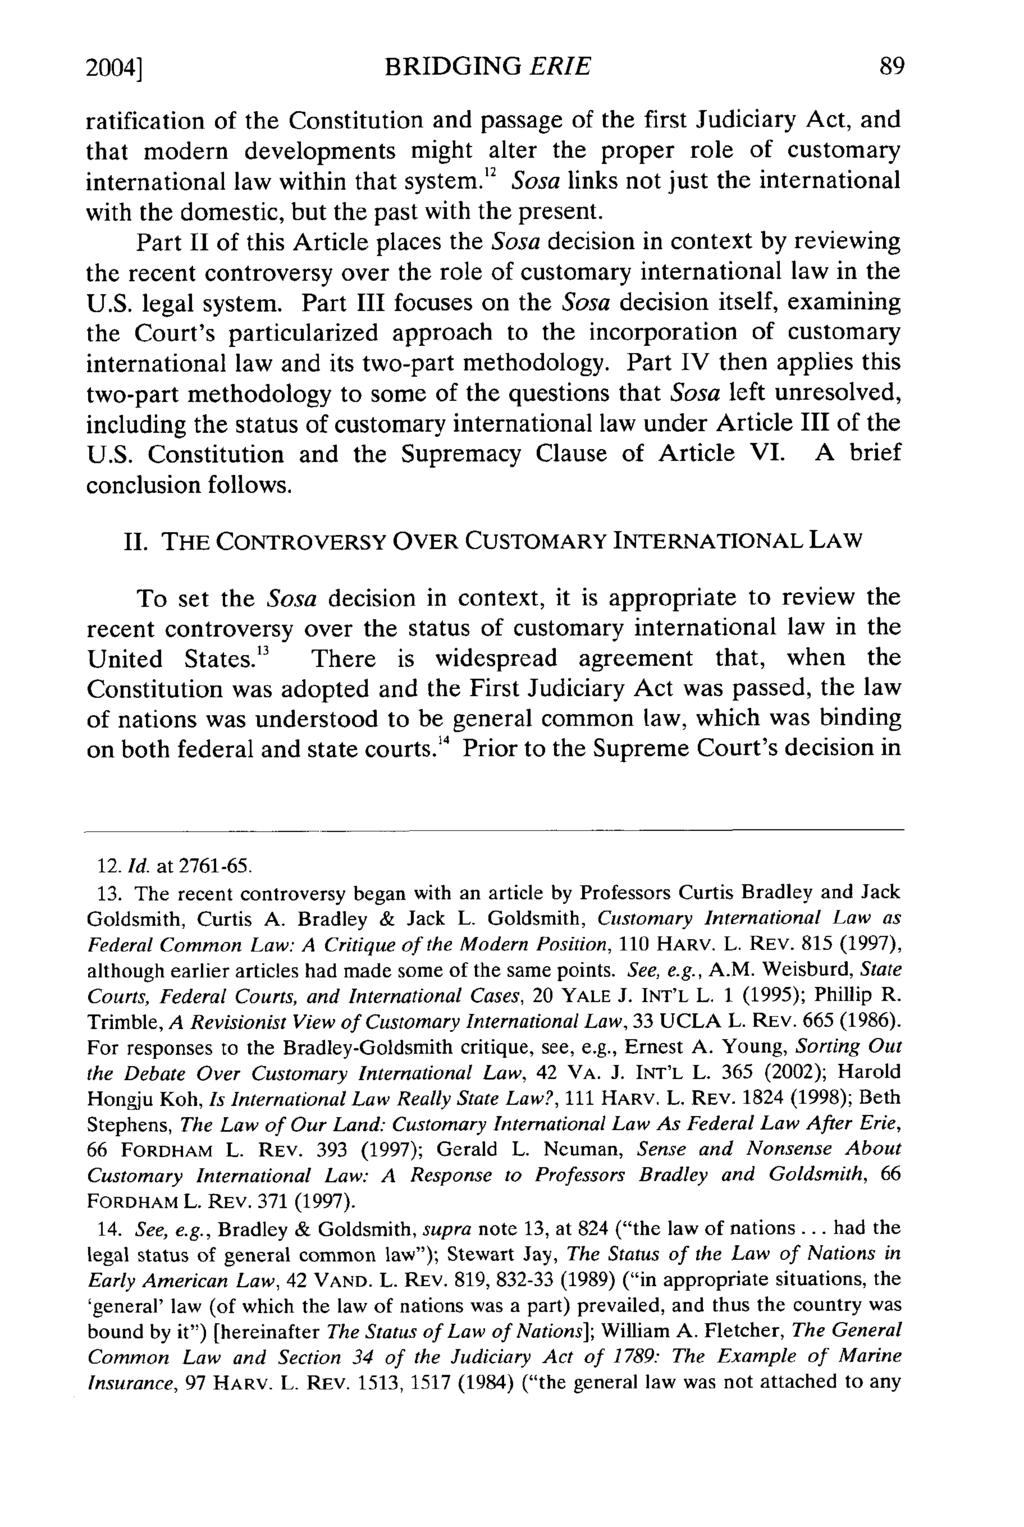 2004] BRIDGING ERIE ratification of the Constitution and passage of the first Judiciary Act, and that modern developments might alter the proper role of customary international law within that system.